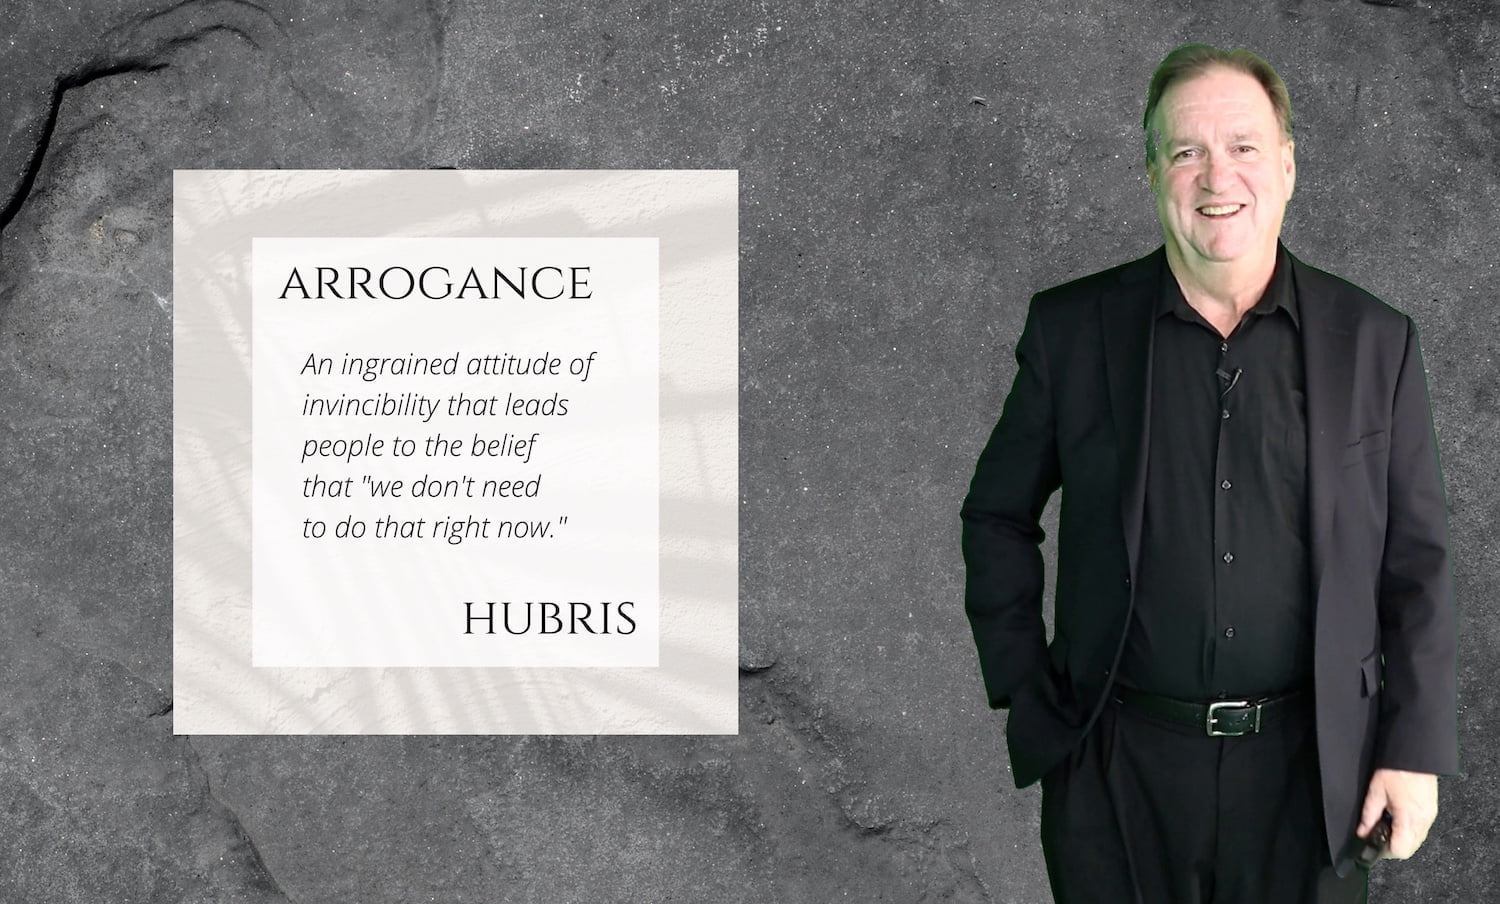 Daily Inspiration: "Arrogance and Hubris: An ingrained attitude of invincibility that leads people to the belief that "we don't need to do that right now."